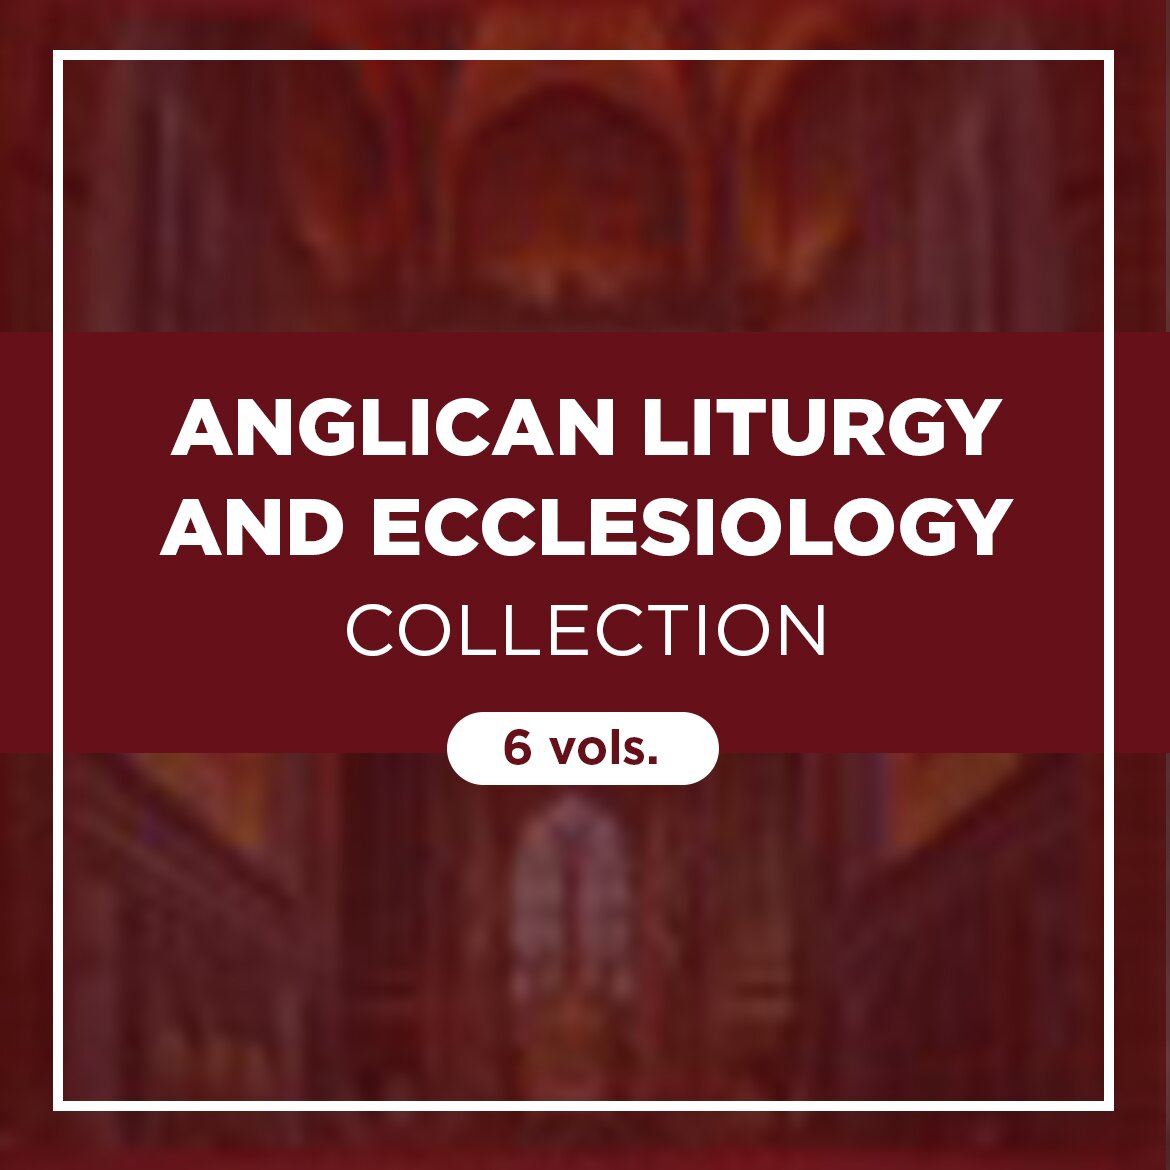 Anglican Liturgy and Ecclesiology Collection (6 vols.)